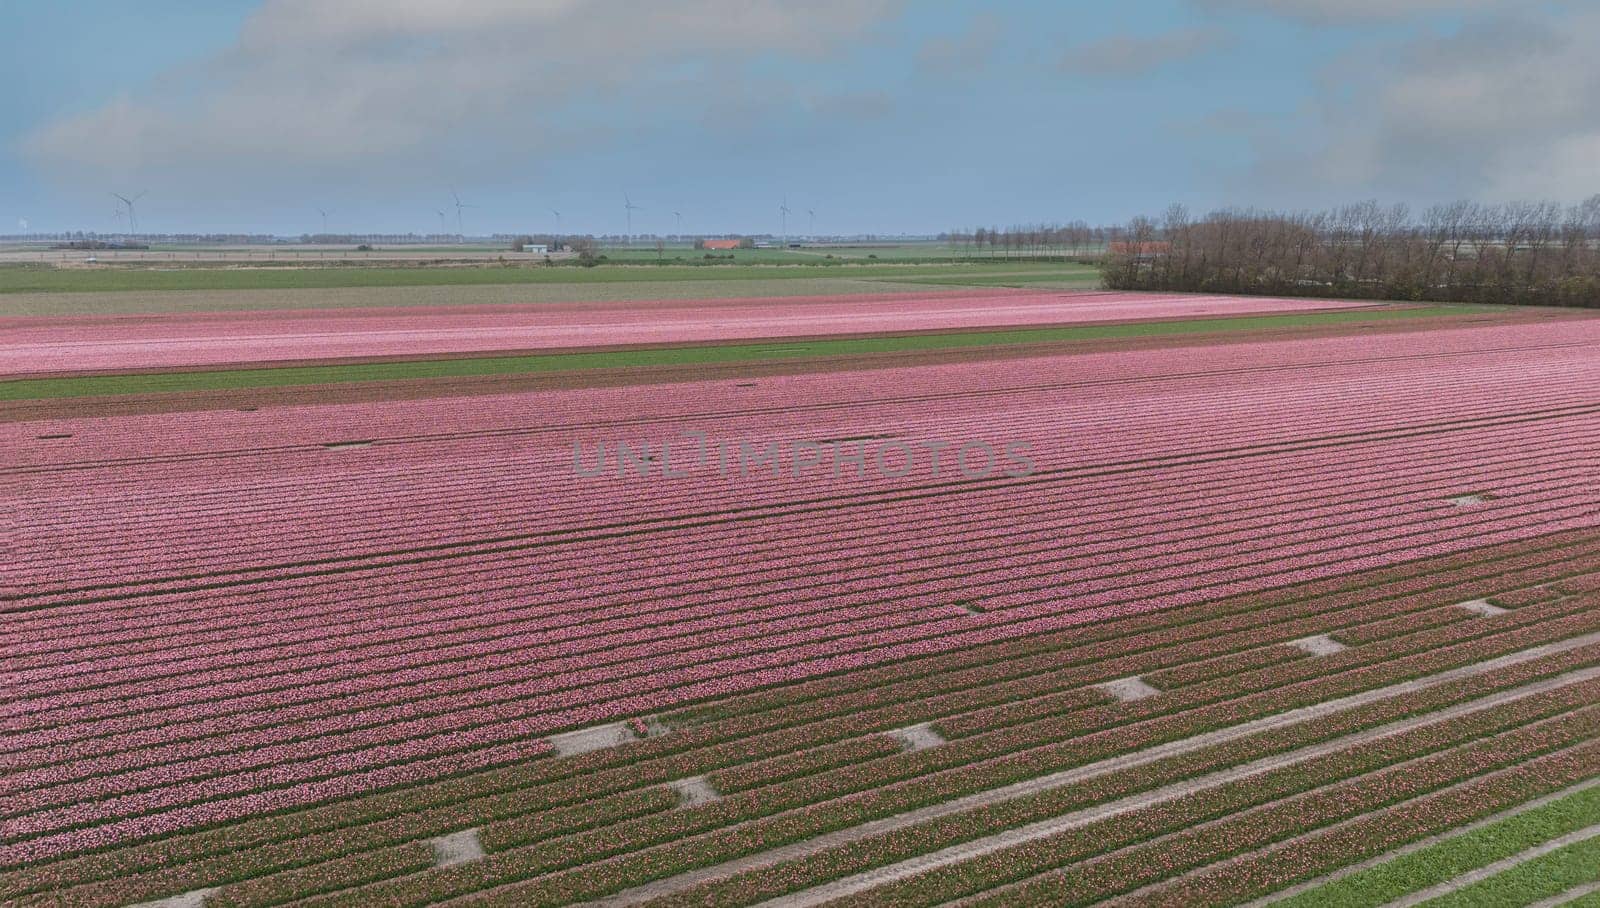 Tulips, endless colorful mixed tulips - wallpaper. Red, yellow, pink tulips blooming on field in South Holland. Endless colorful flowering tulip fields in spring in South Holland made by drone